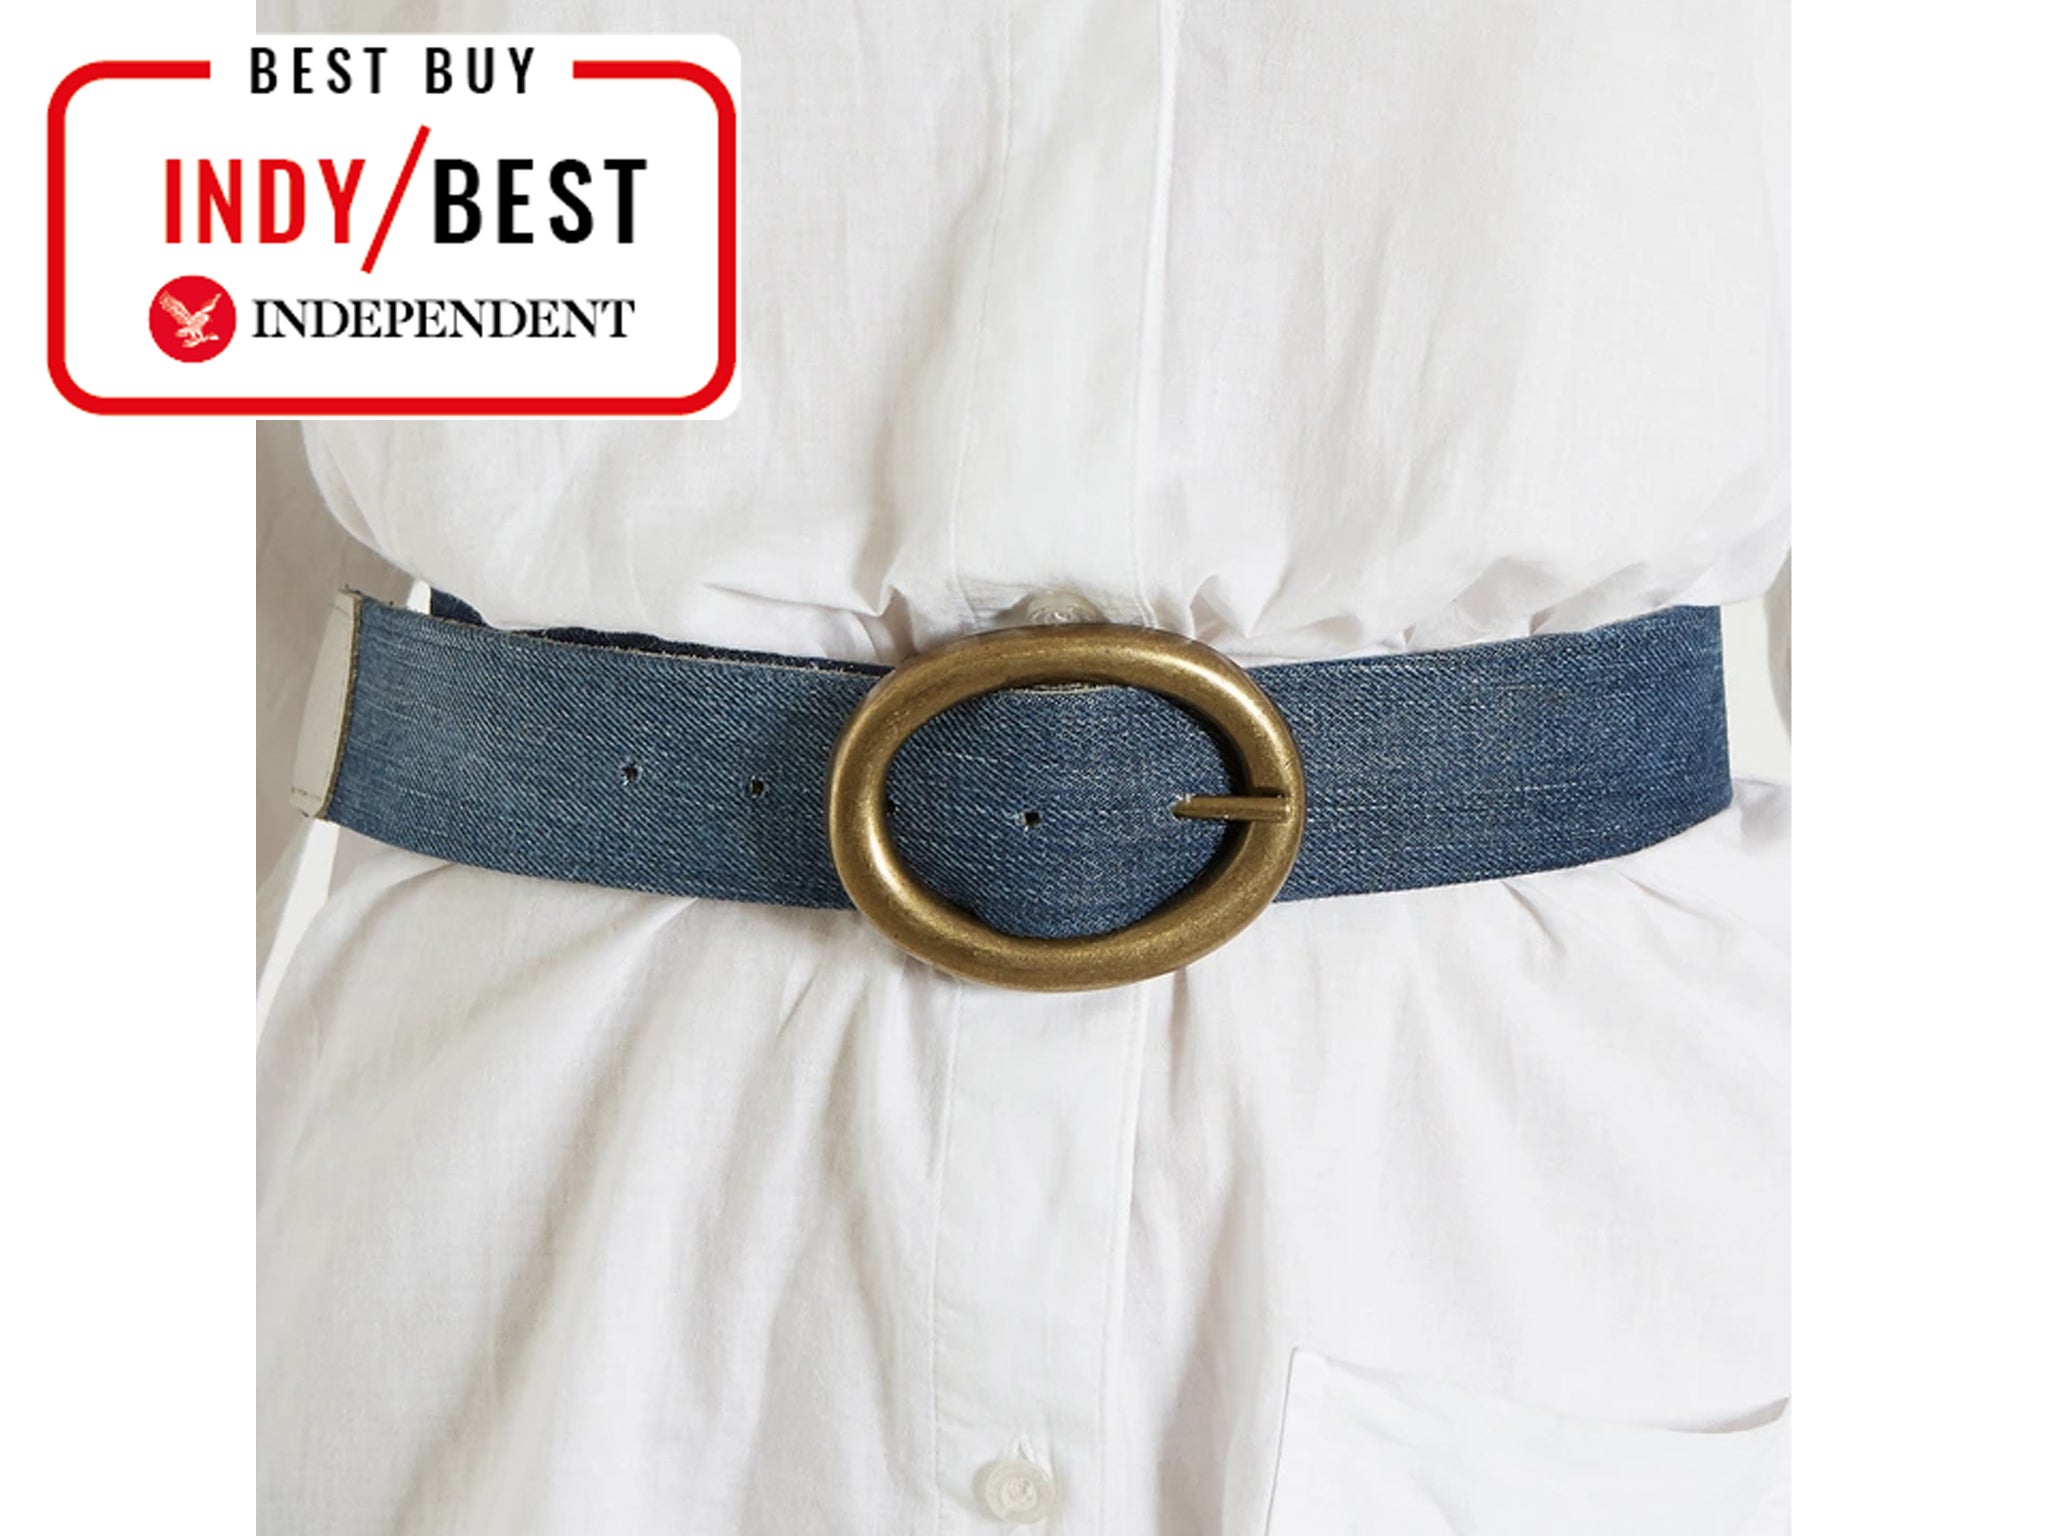 New Colourful Fashion Quality PVC Womens Belts For Jeans Trousers UK Seller 